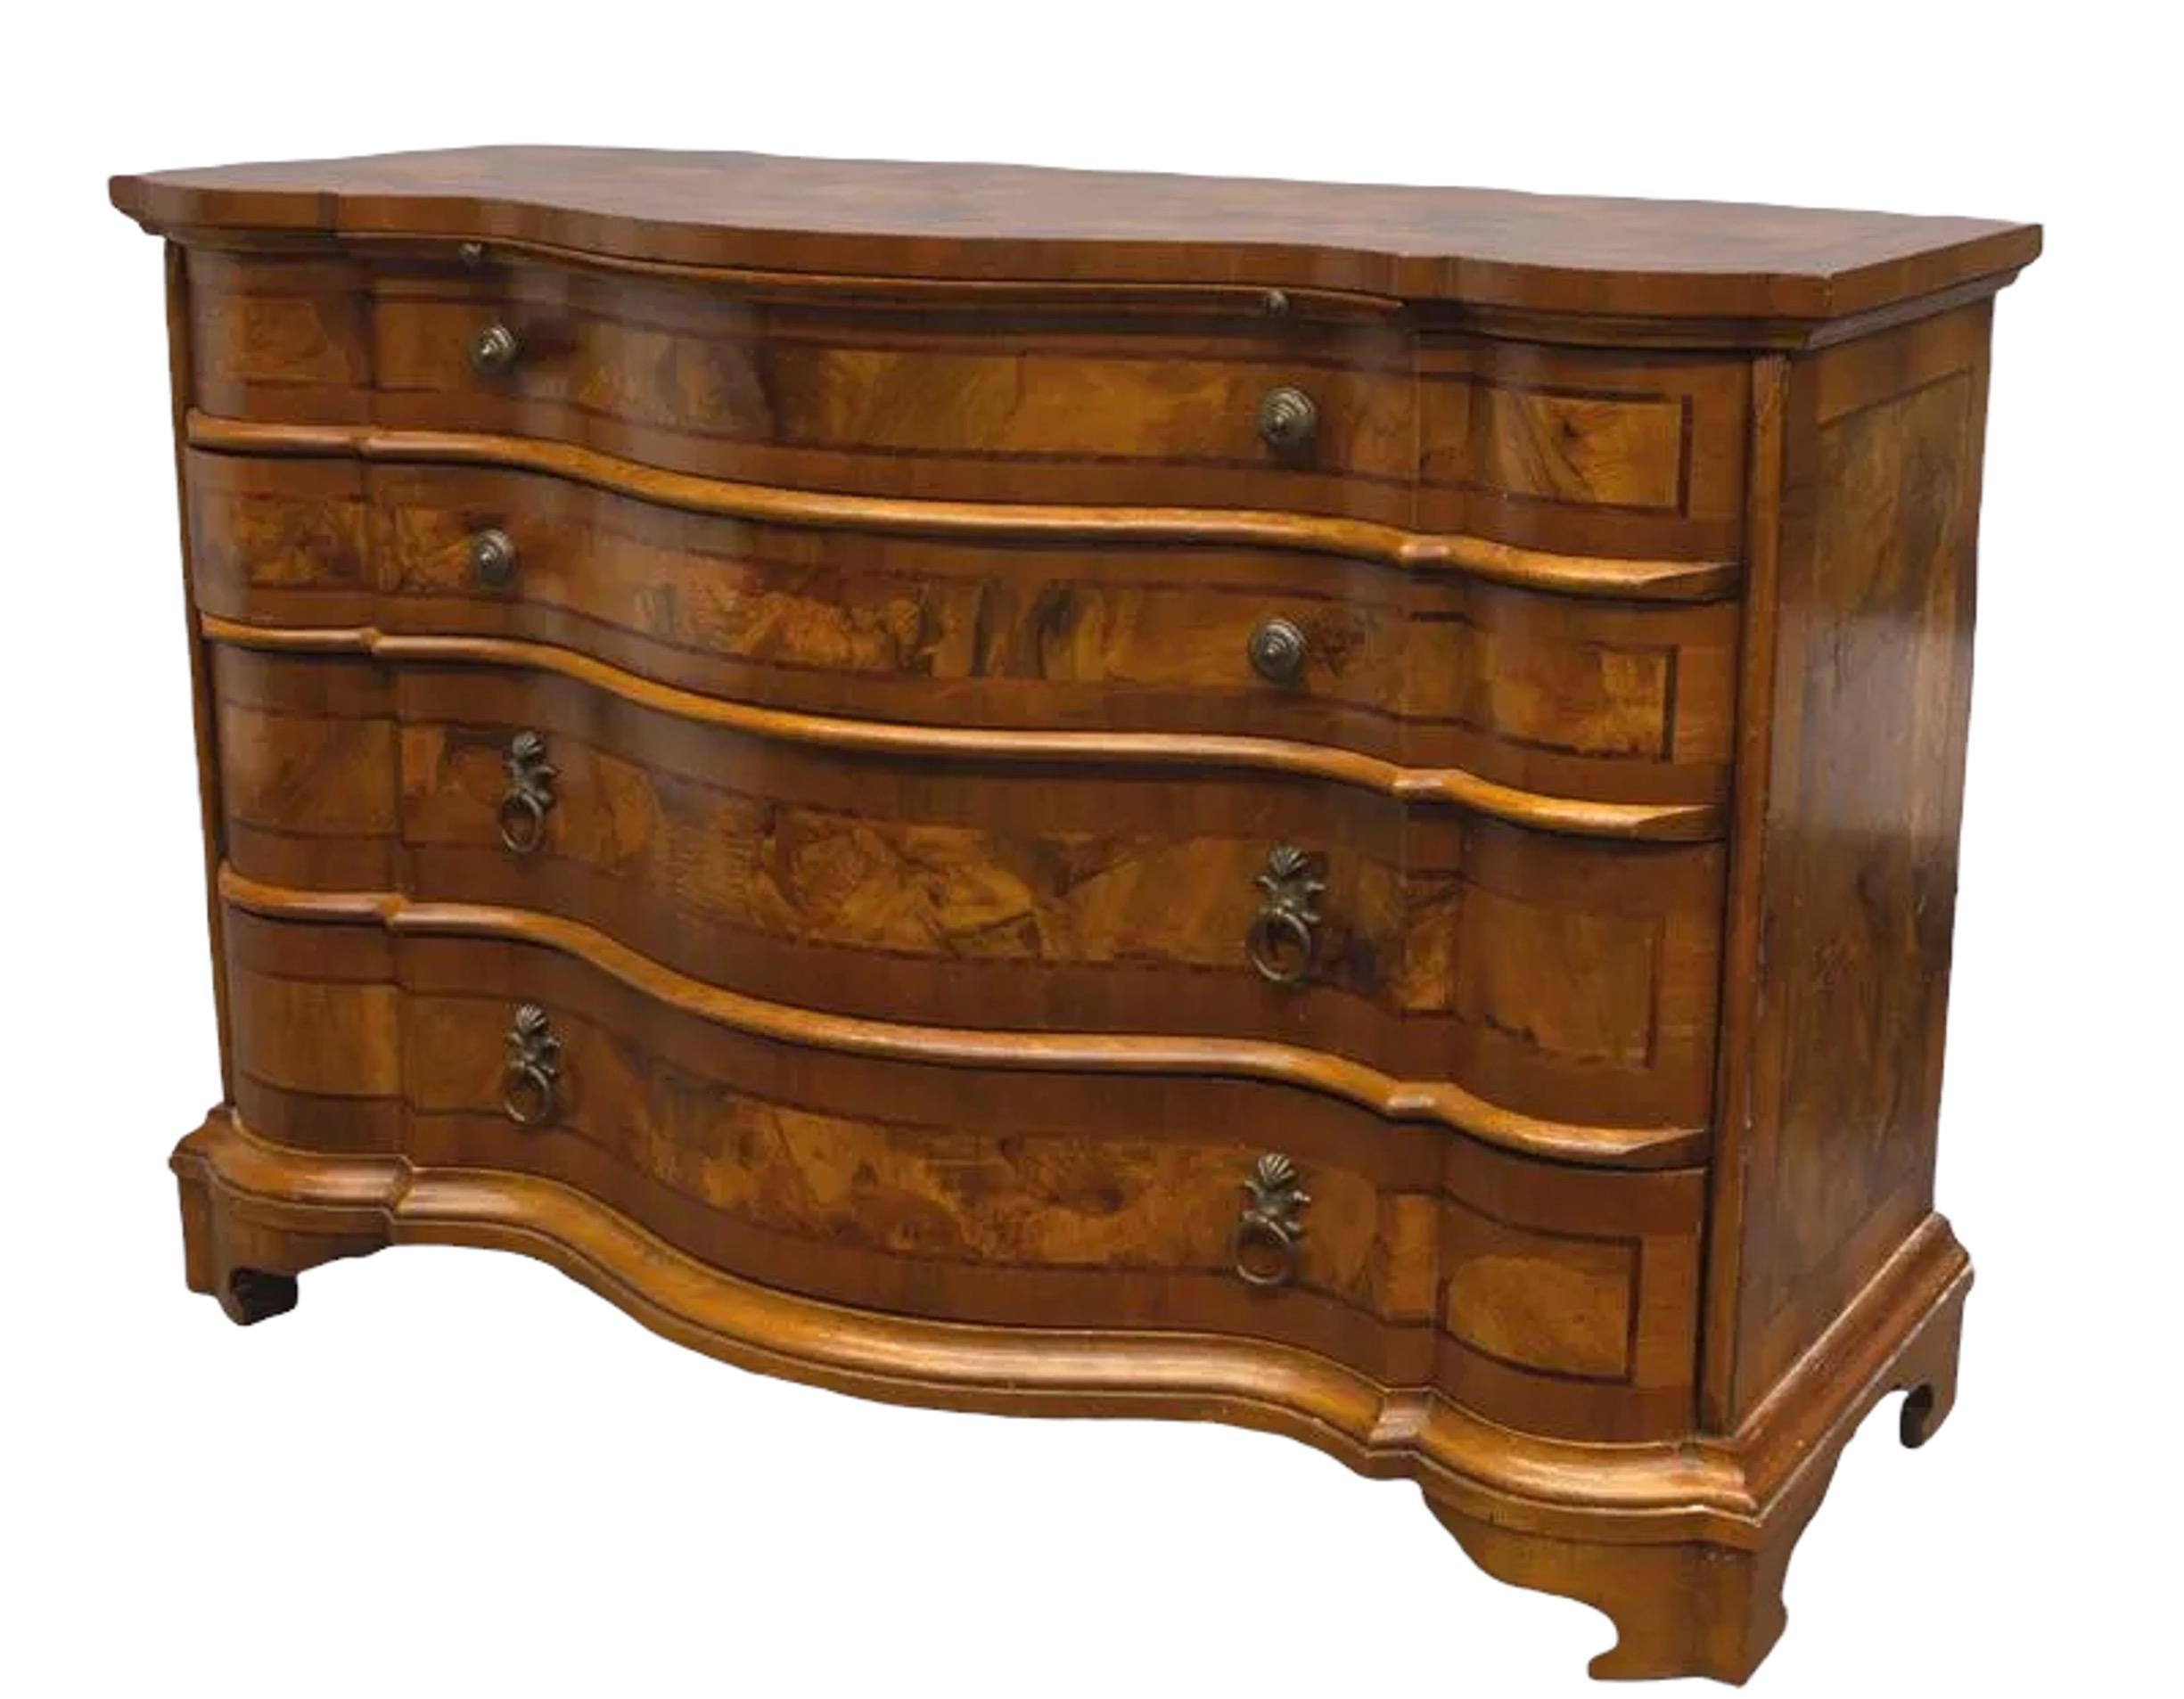 Hand-Carved Circa 1750s German Oxbow Shaped Walnut Commode